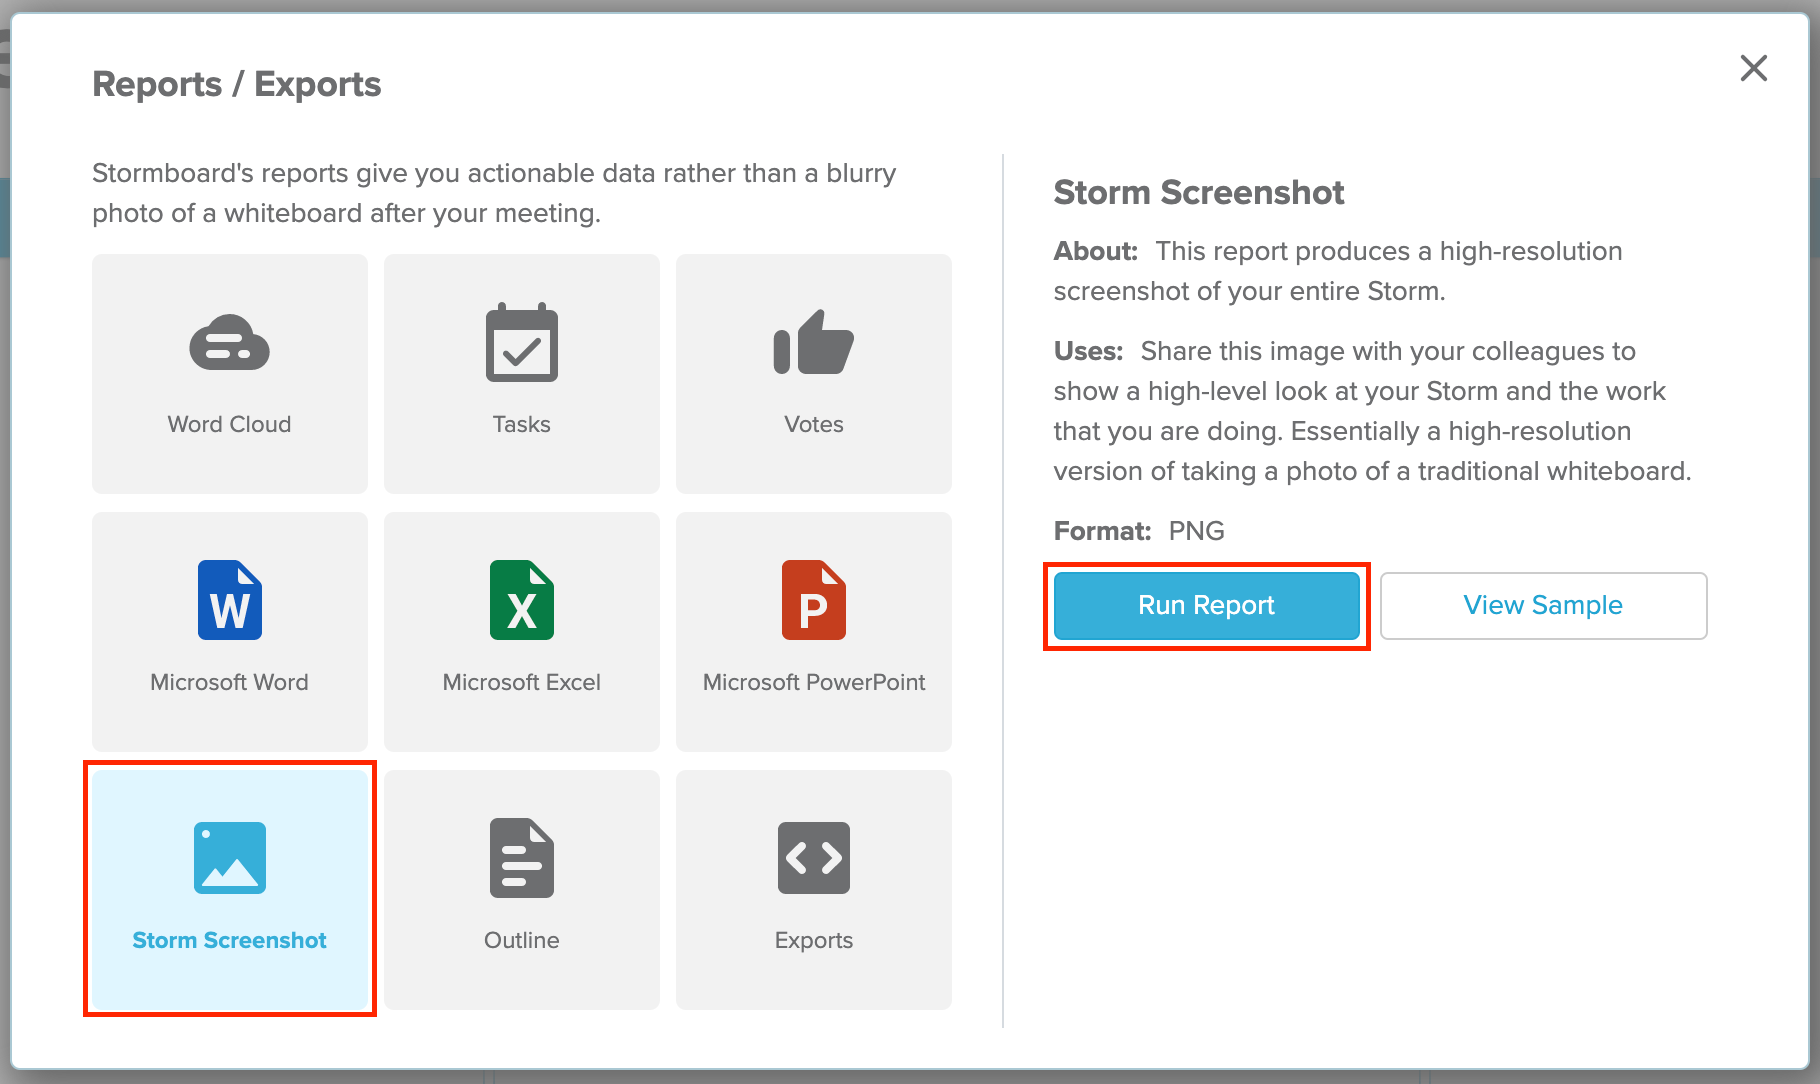 Storm Screenshot icon highlighted in reports menu